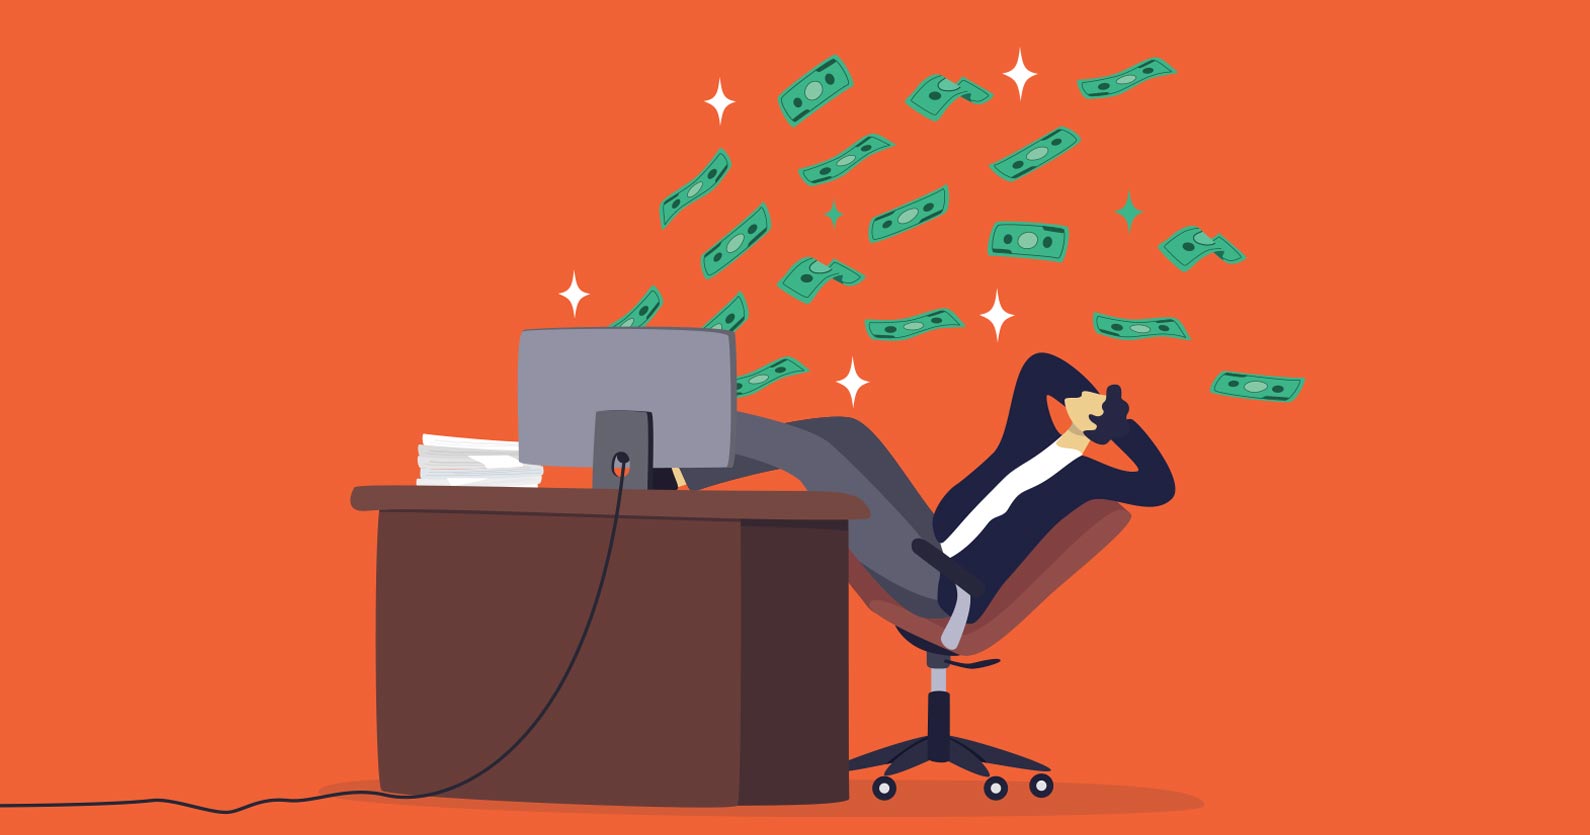 Illustration of a man in front of a computer with cash bills flying out representing sucessfull ecommerce sales